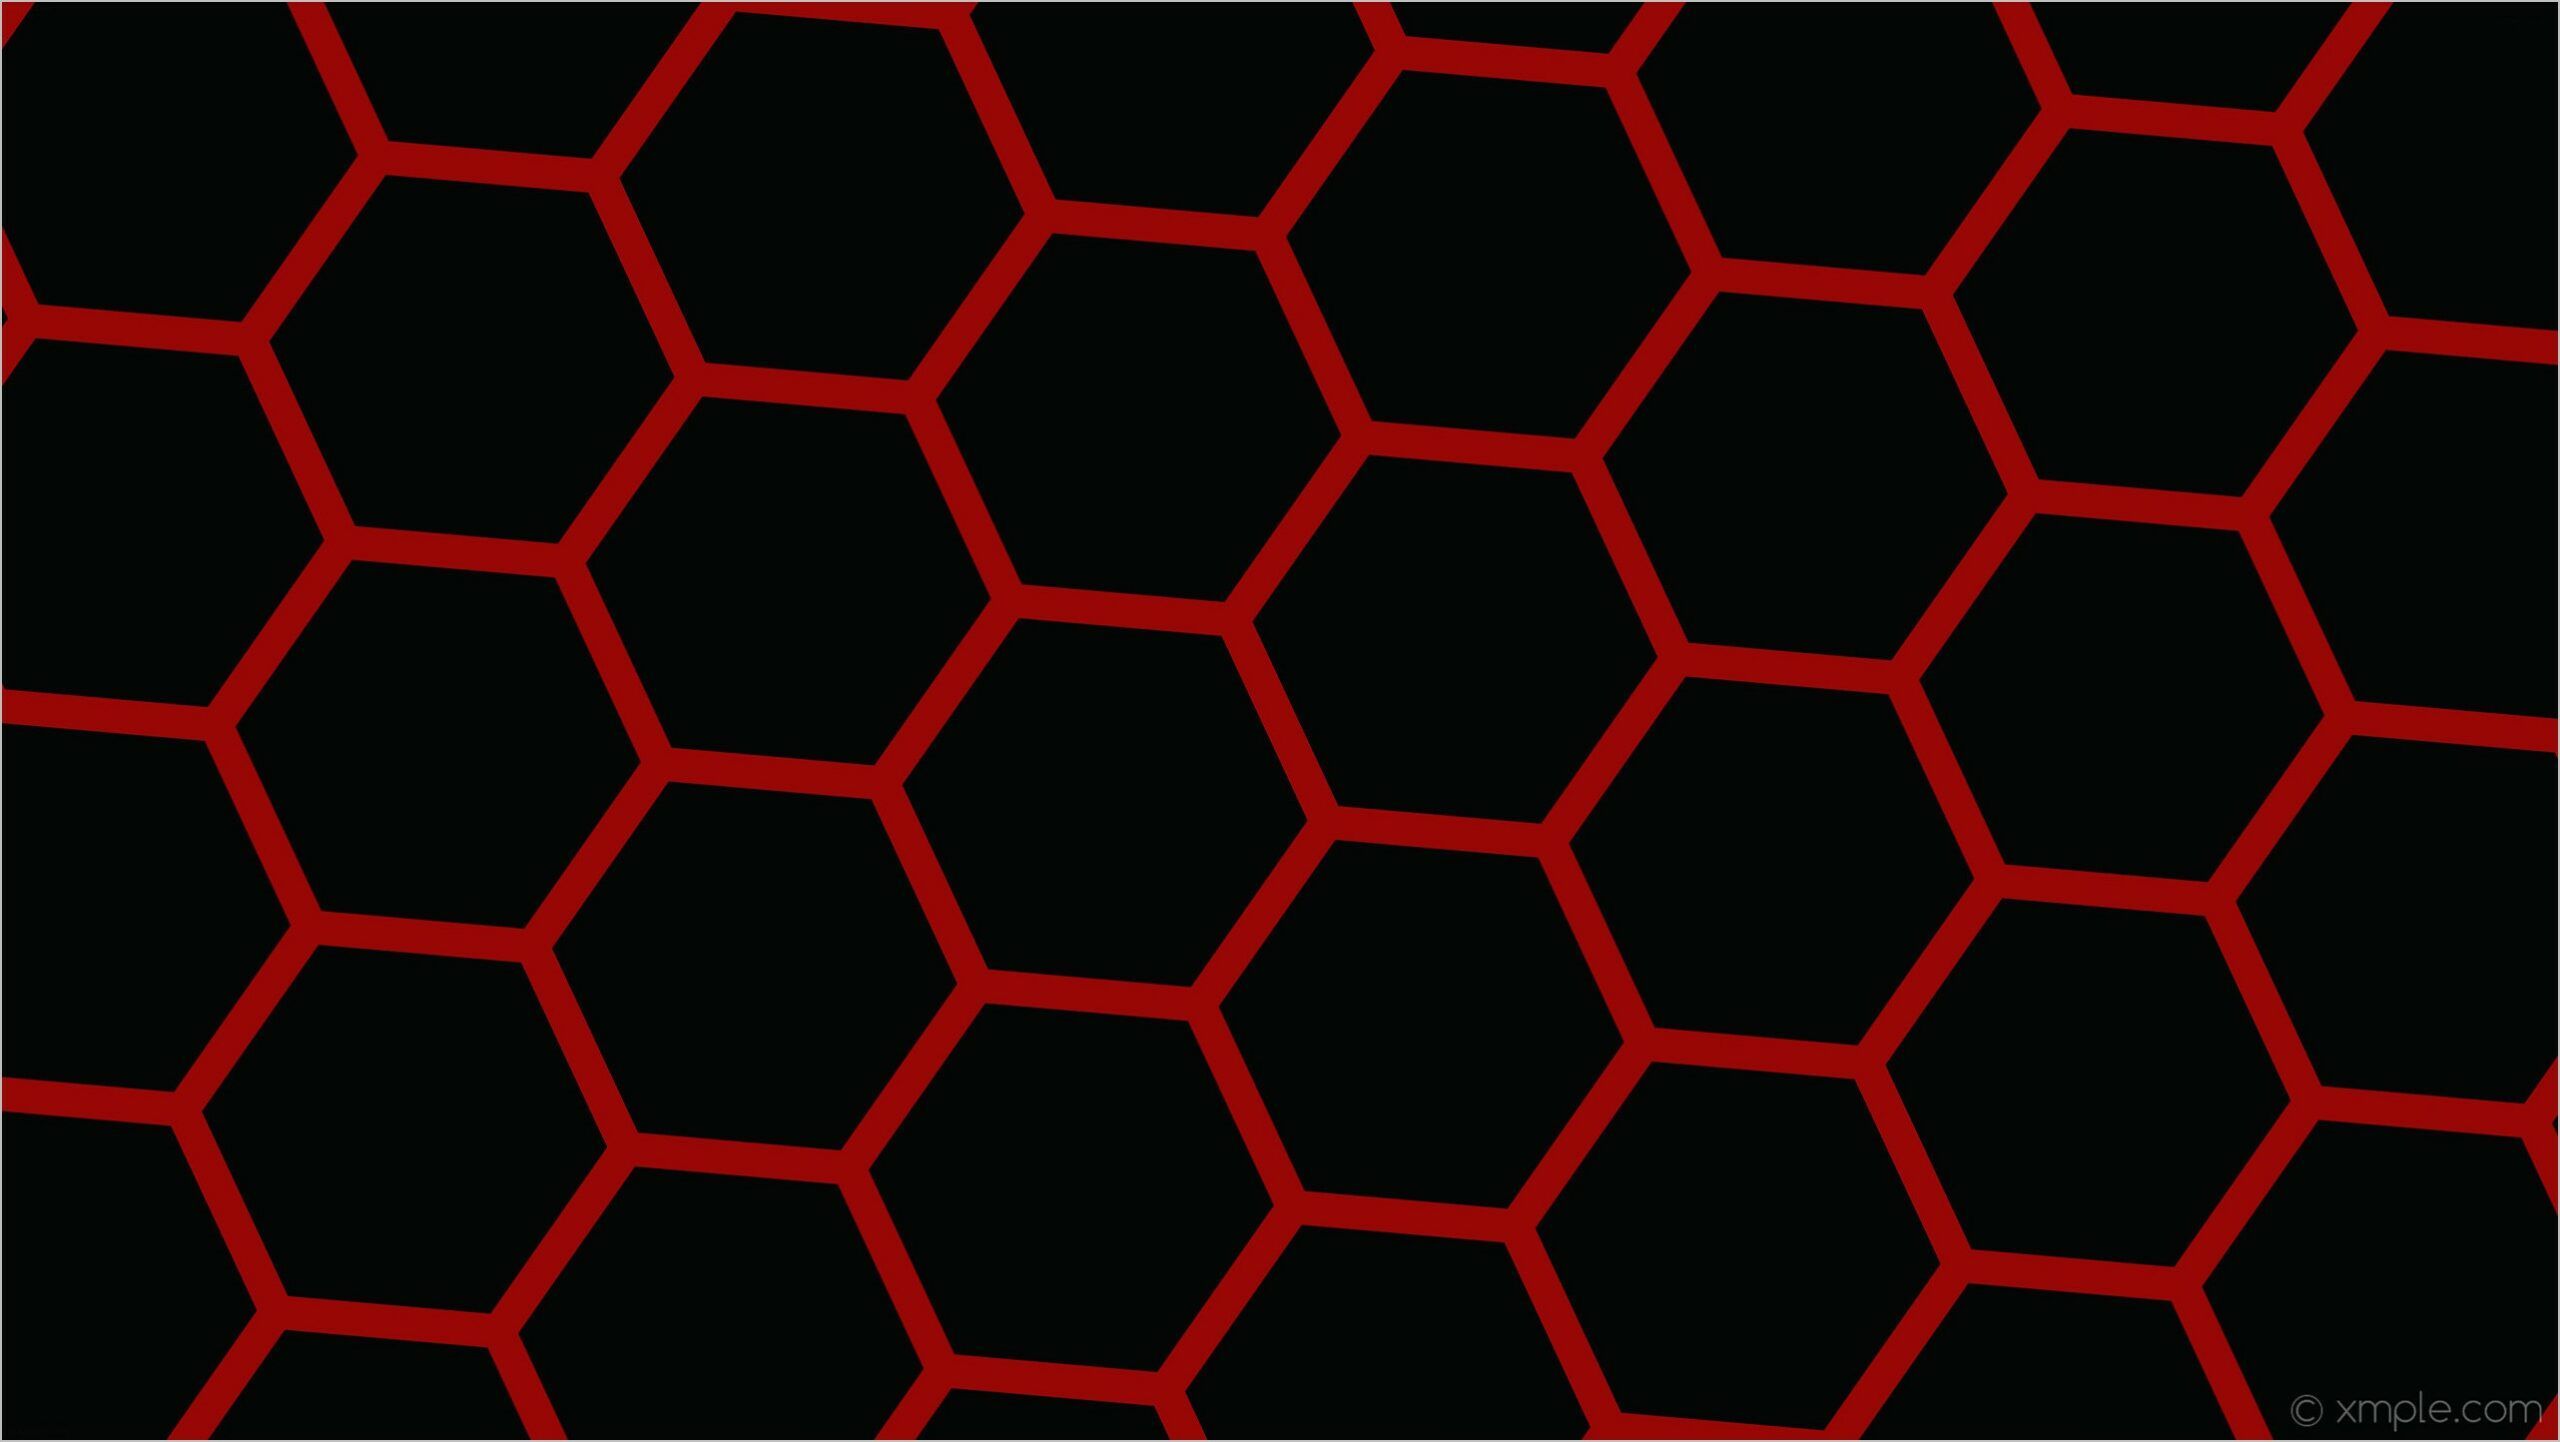 Red And Black Beehive Wallpaper 4k. Bee hive, Wallpaper, Red